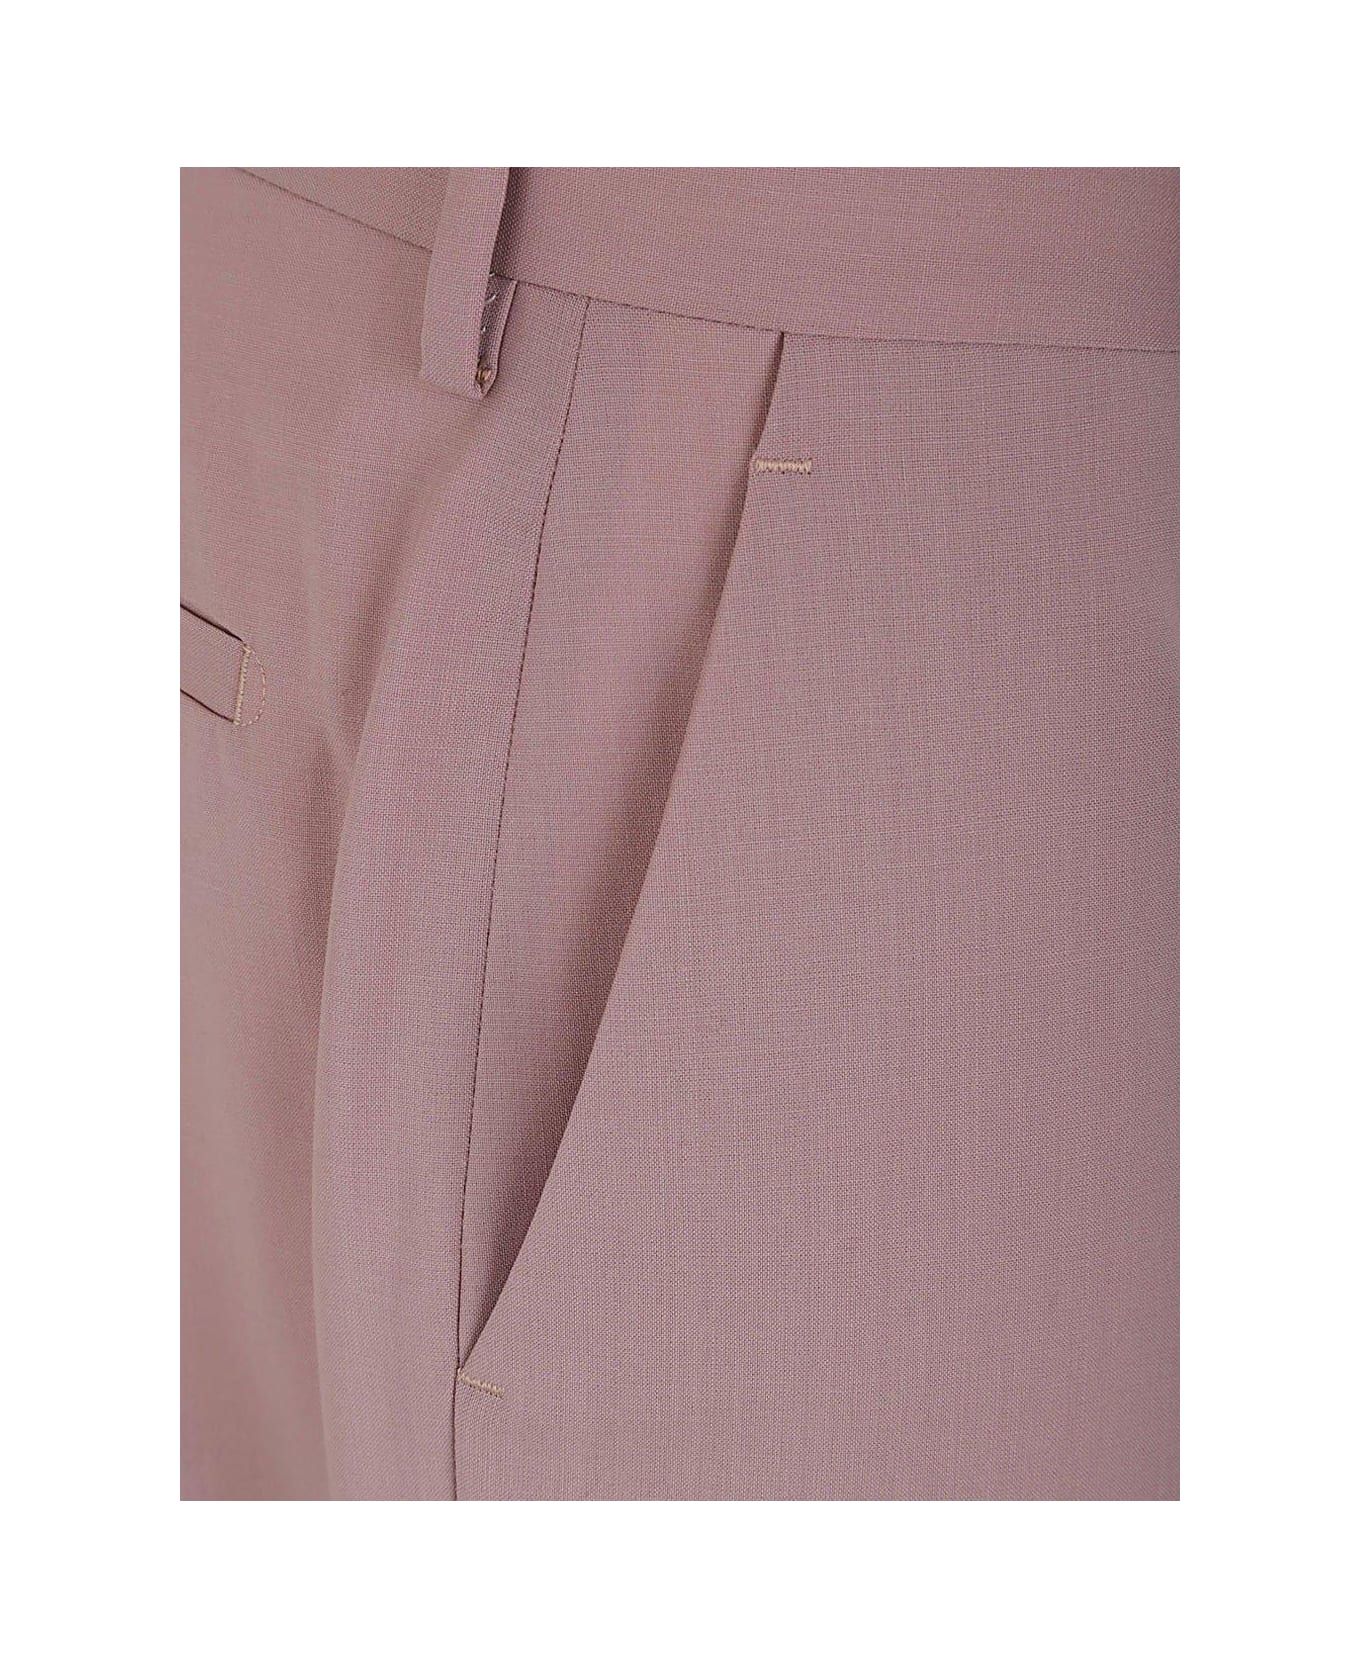 Rick Owens Straight-leg Cropped Tailored Pants - DUSTY PINK